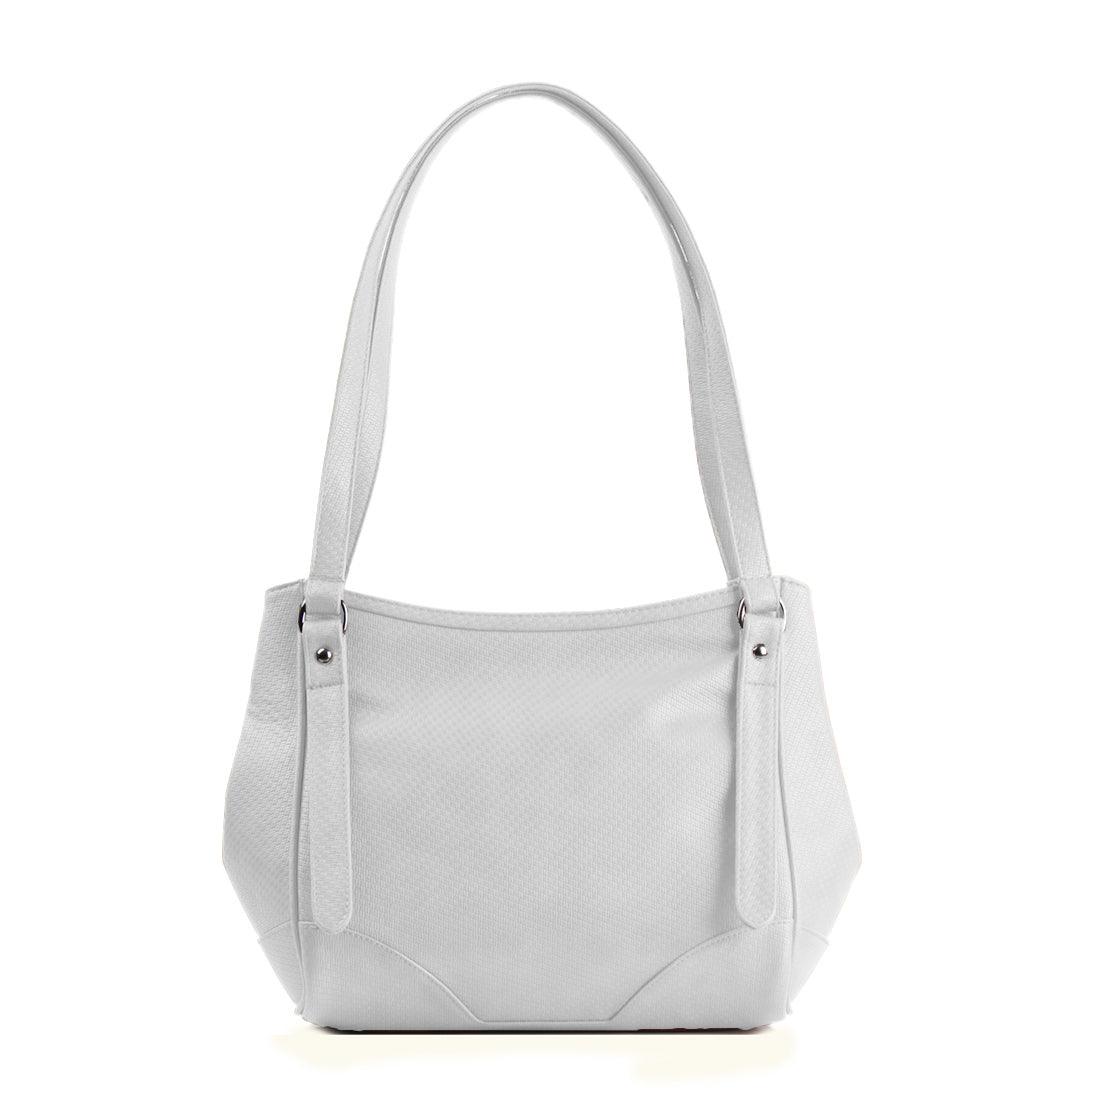 White Leather Tote Bag The Grey Rocks - CANVAEGYPT